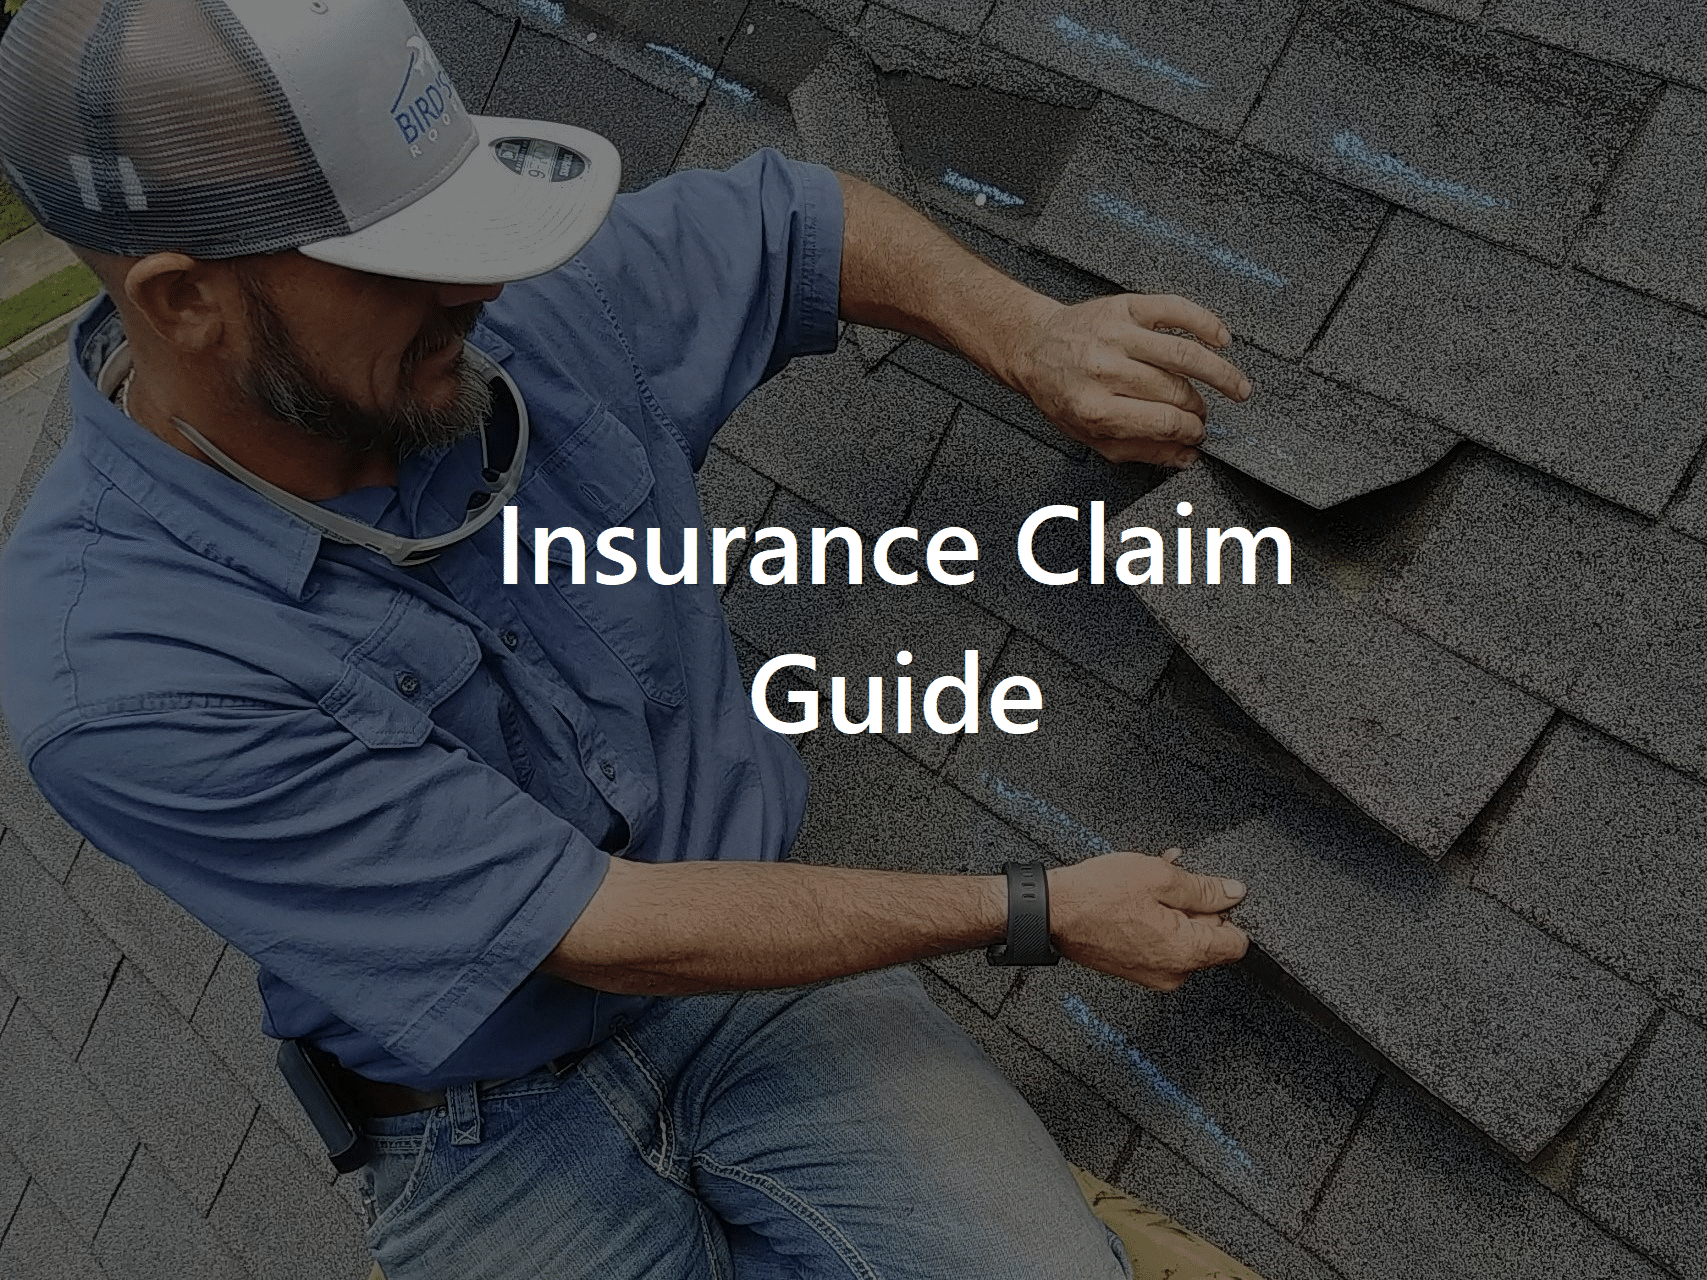 Roof Insurance Claim Guide2